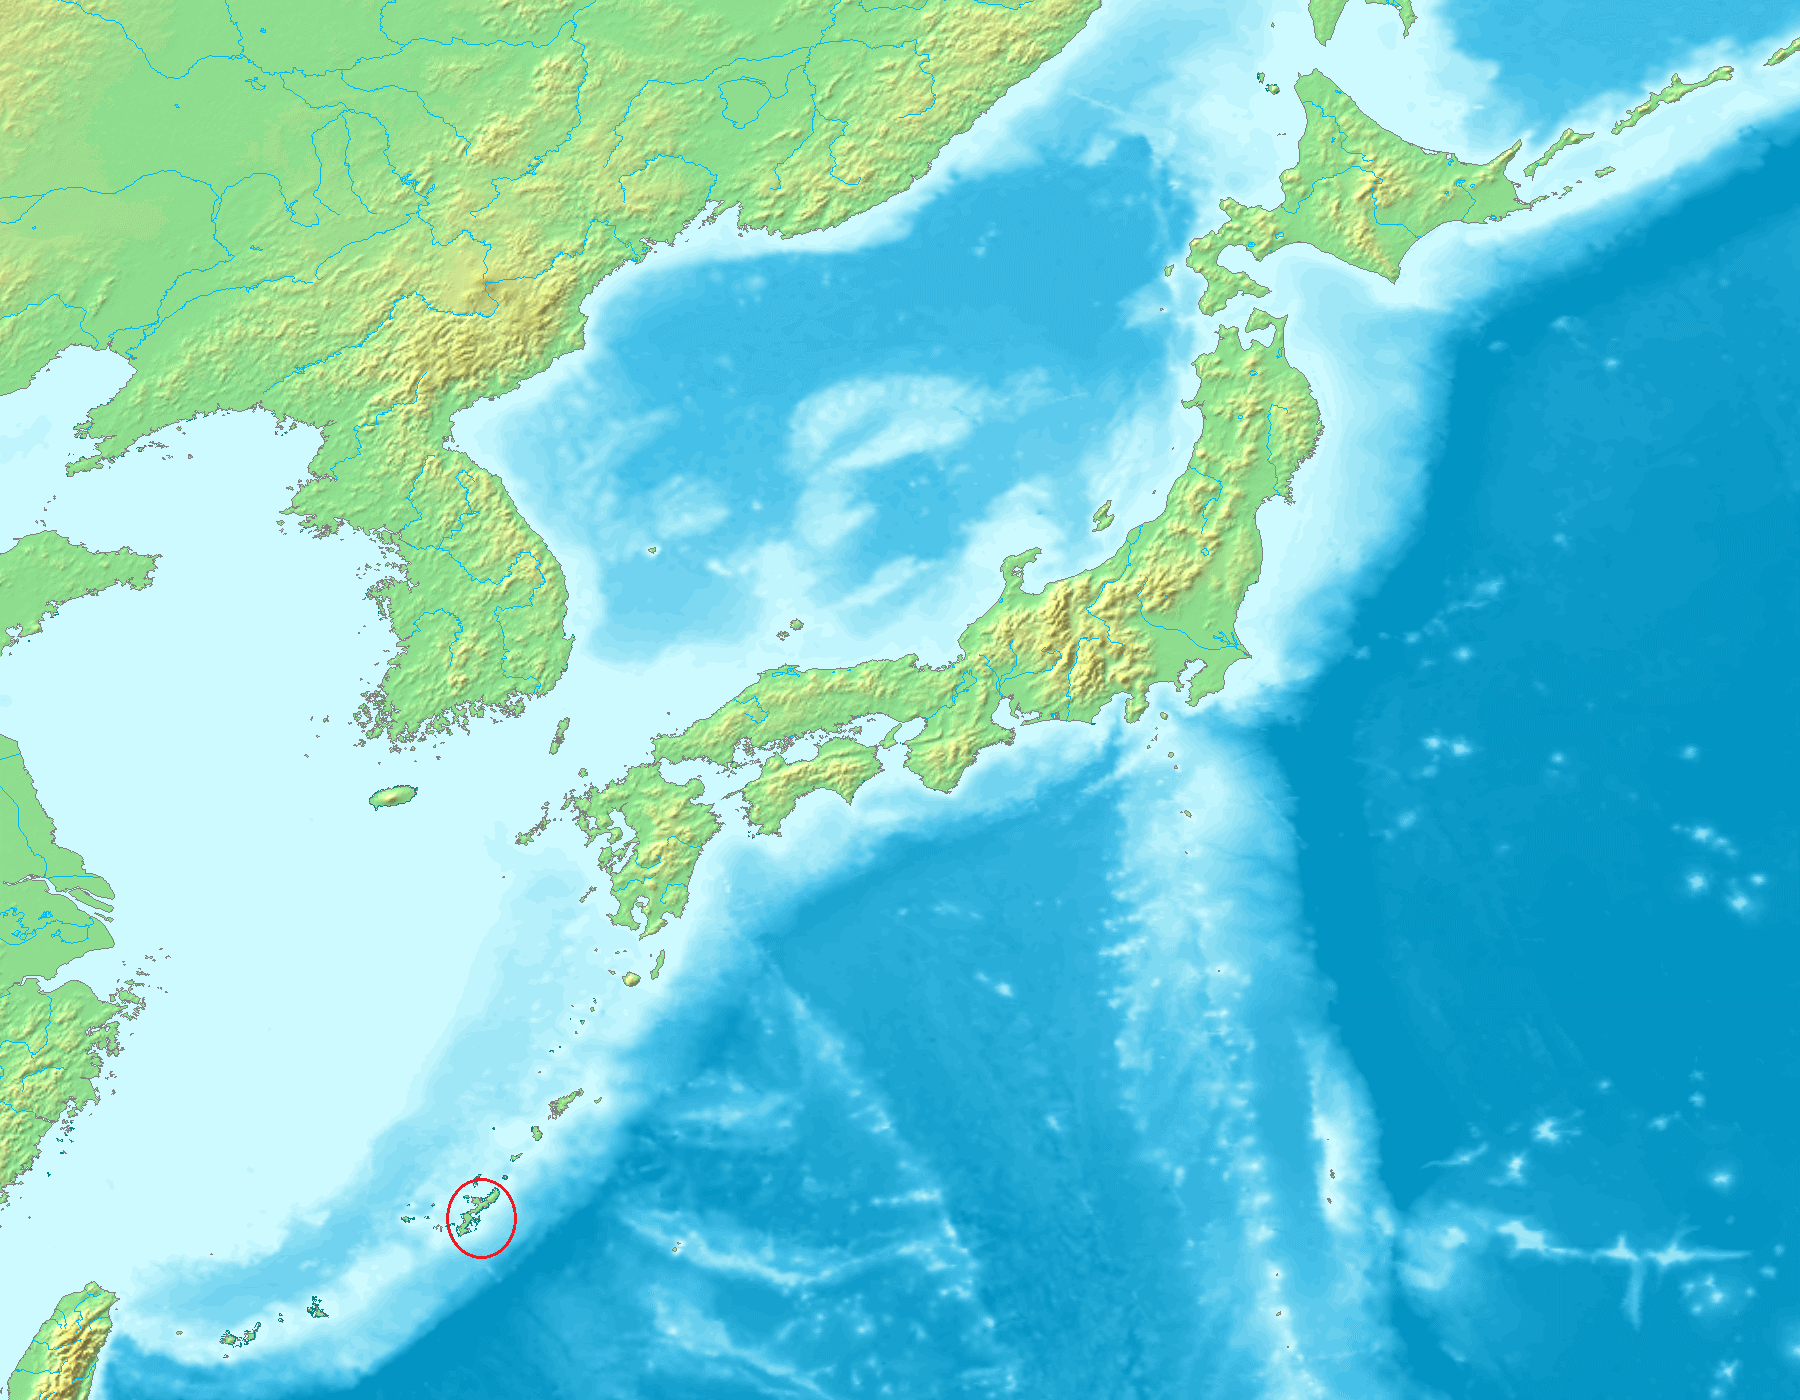 Topographic_Map_of_Japan